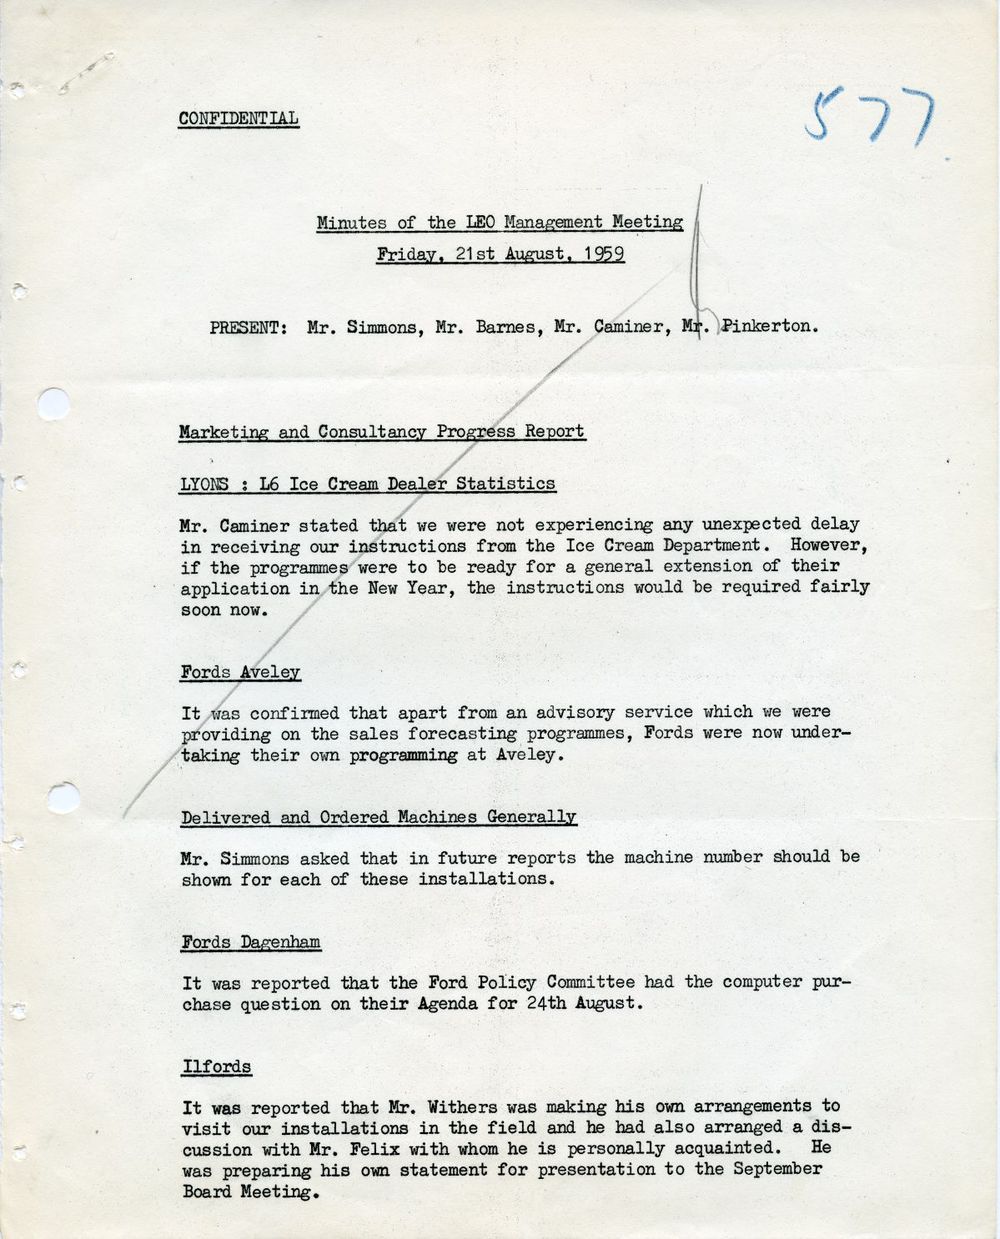 Article: 56040 LEO Management Meeting, 21/8/1959